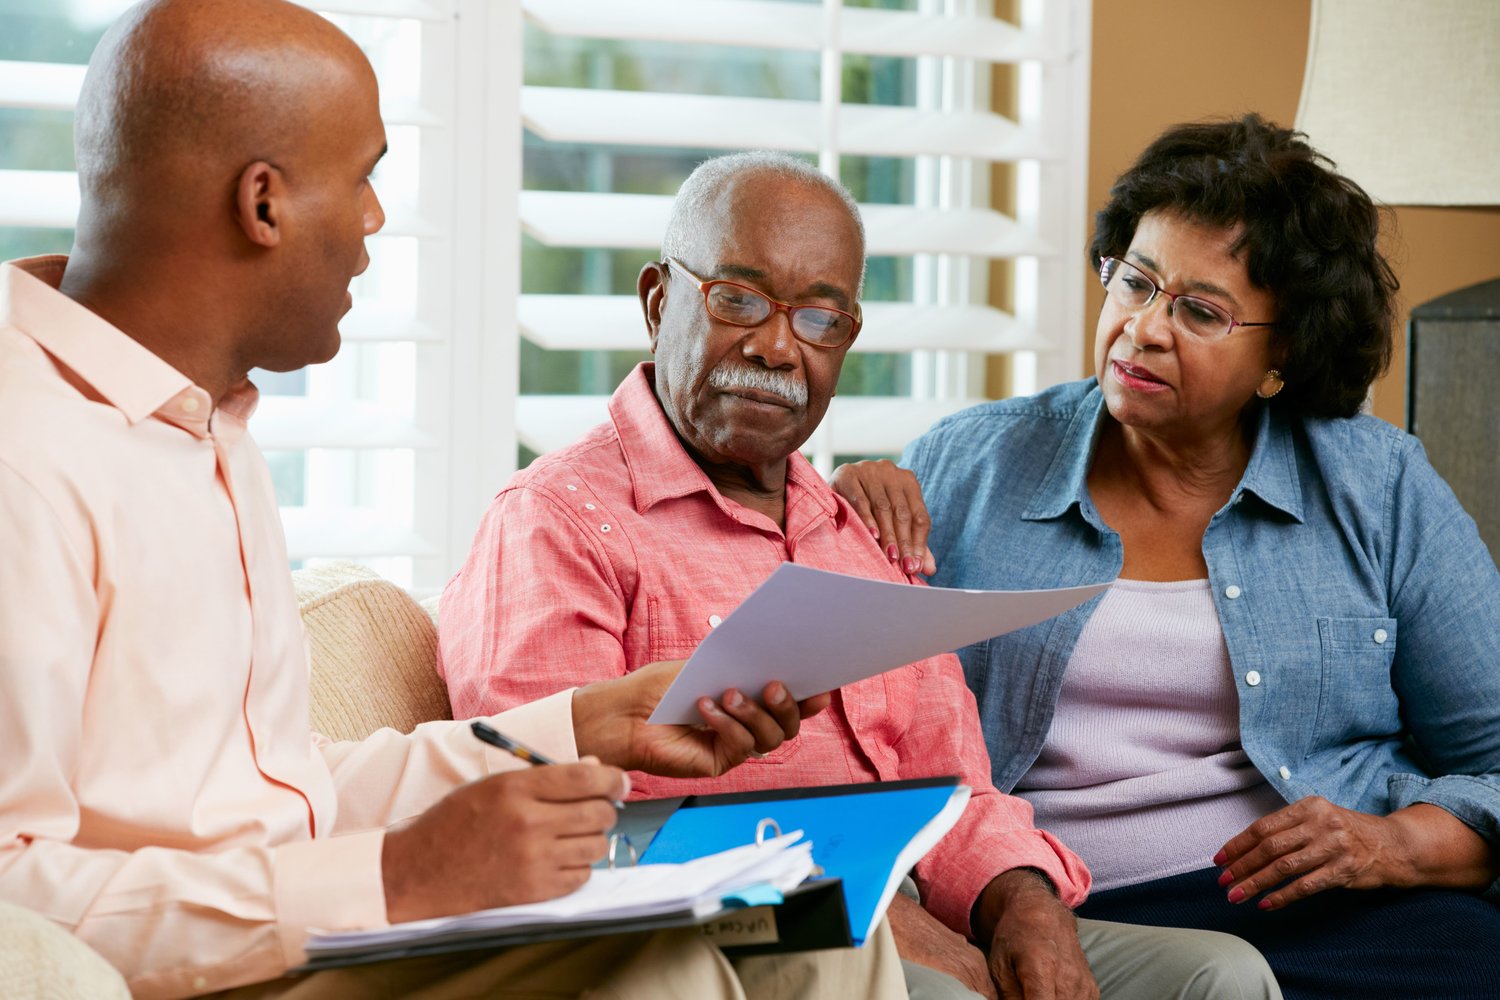 A family discusses plans with their elderly father.